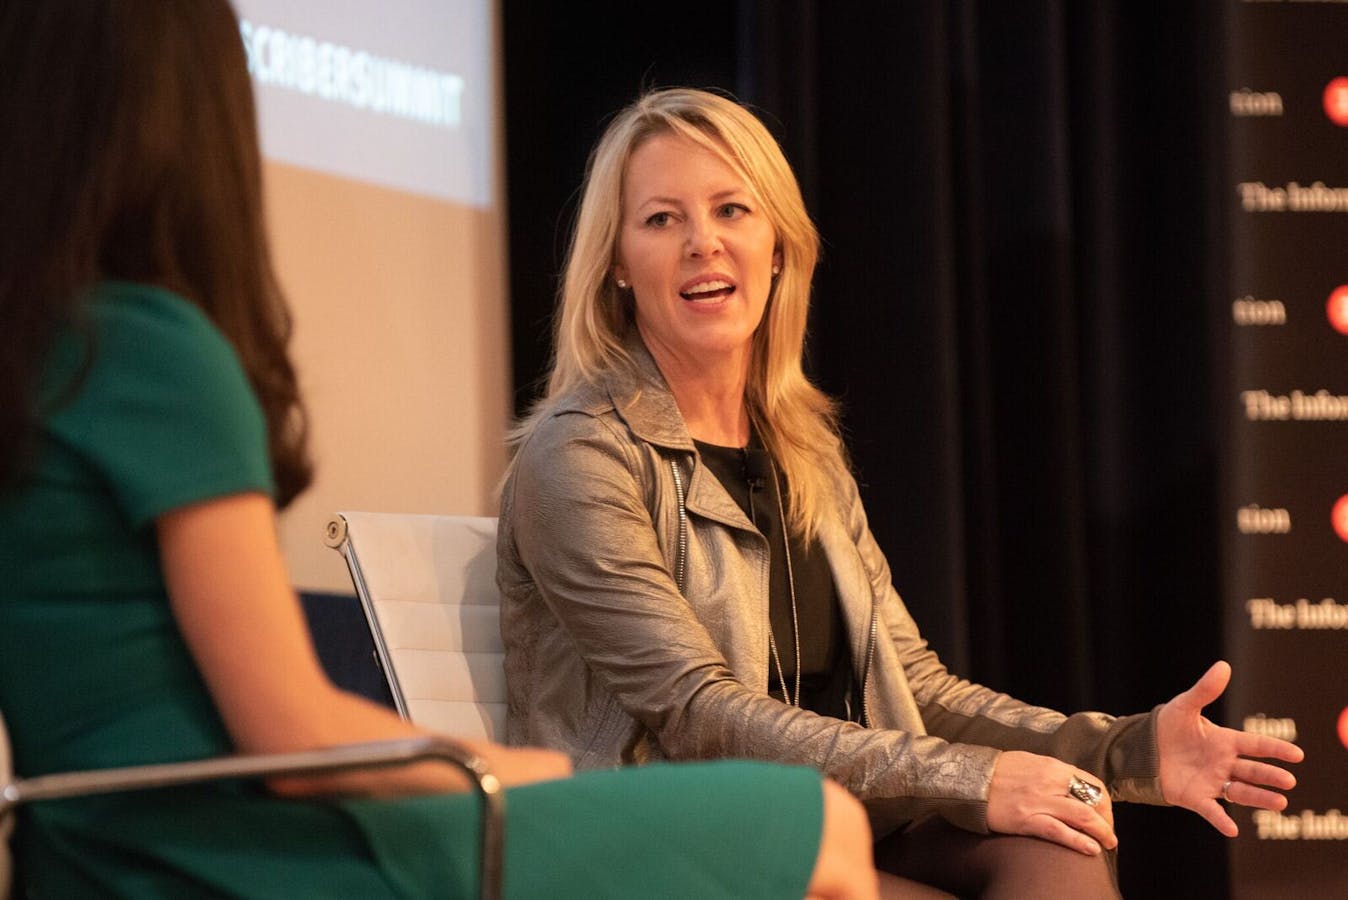 Andreessen Horowitz general partner Katie Haun, in conversation with The Information founder Jessica Lessin, at The Information Subscriber Summit in San Francisco.